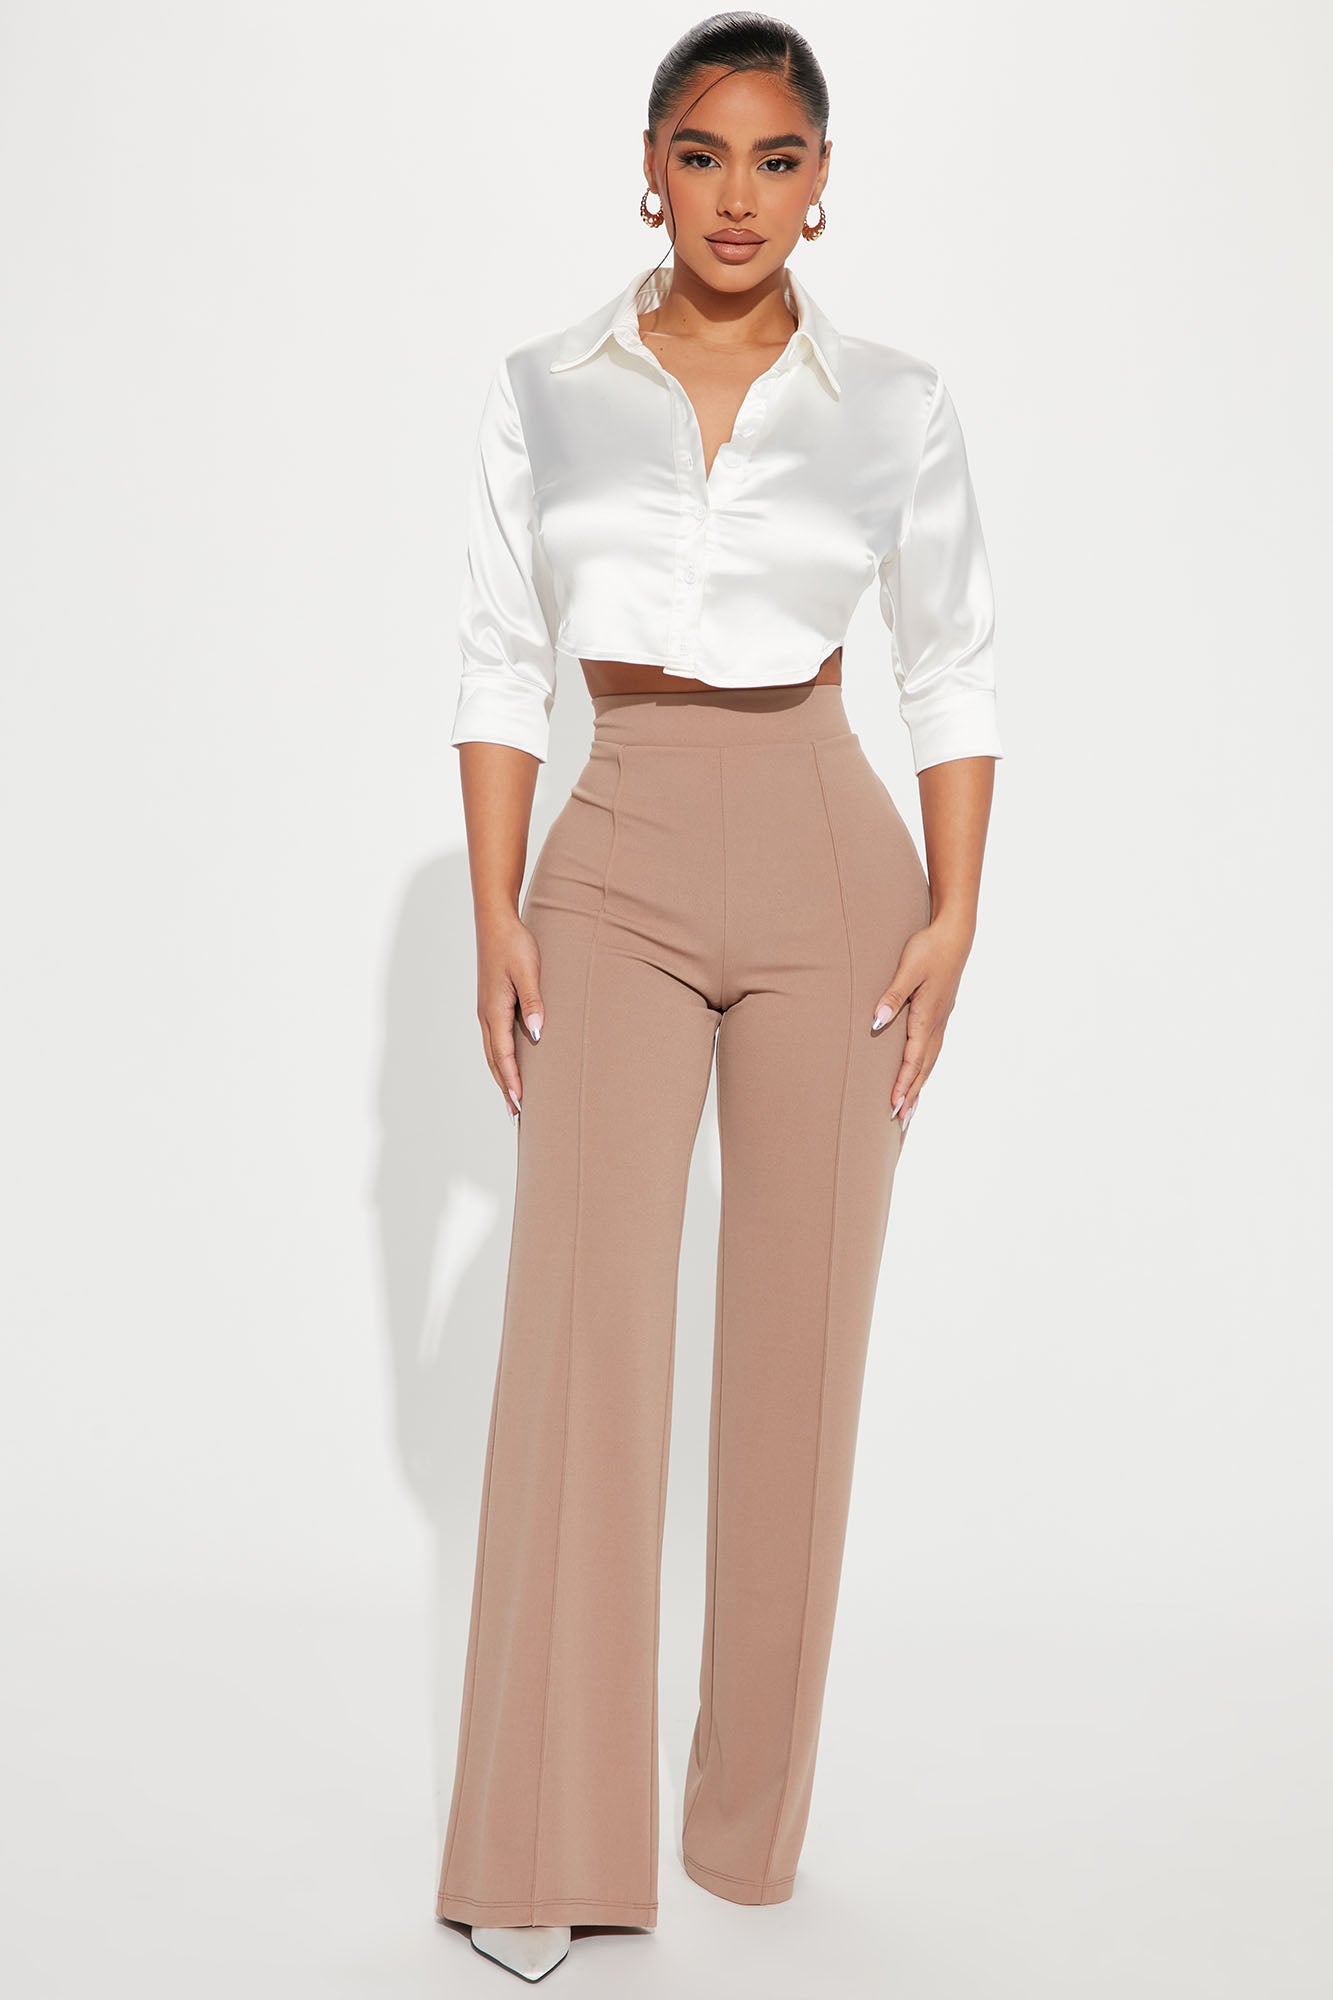 Victoria High Waisted Dress Pants - Taupe  Casual outfits for girls, High  waisted dress pants, Business casual outfits for work